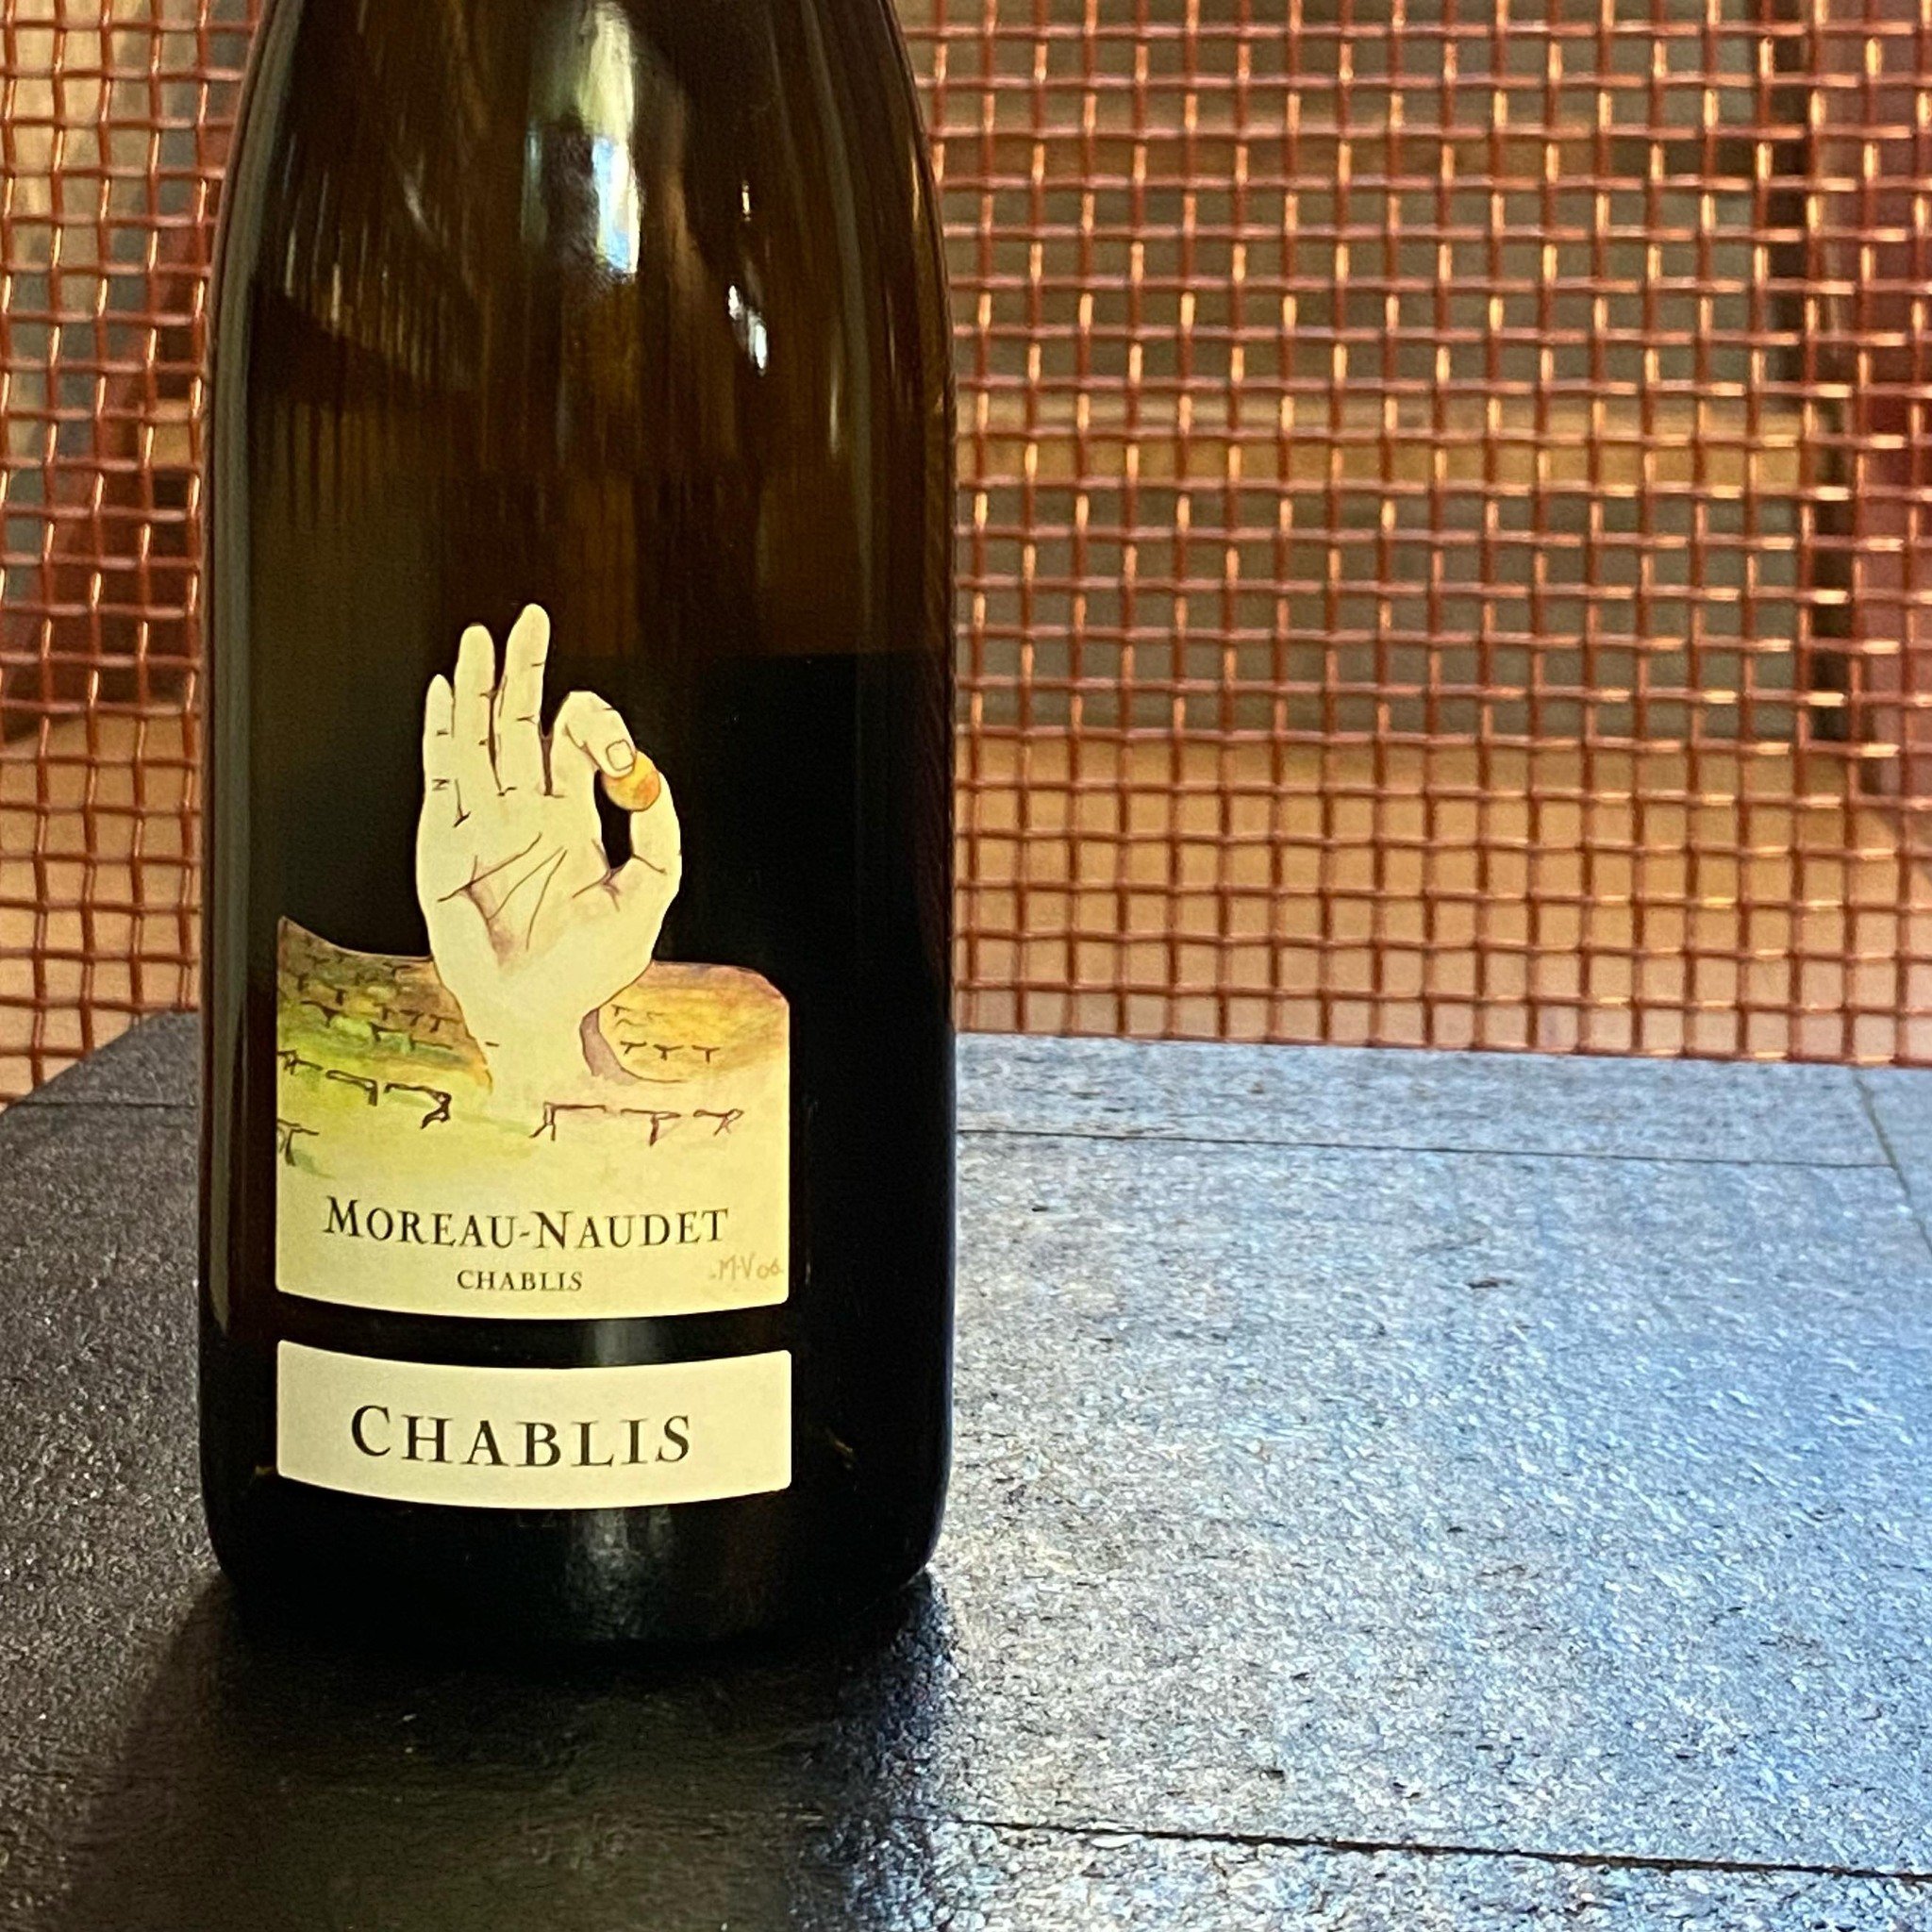 Bad day to be a bottle of Chardonnay.
This little winner from @moreau_naudet has been looking at us funny all afternoon.
Now is the perfect time to pull the cork out; with a day at home ahead of us tomorrow